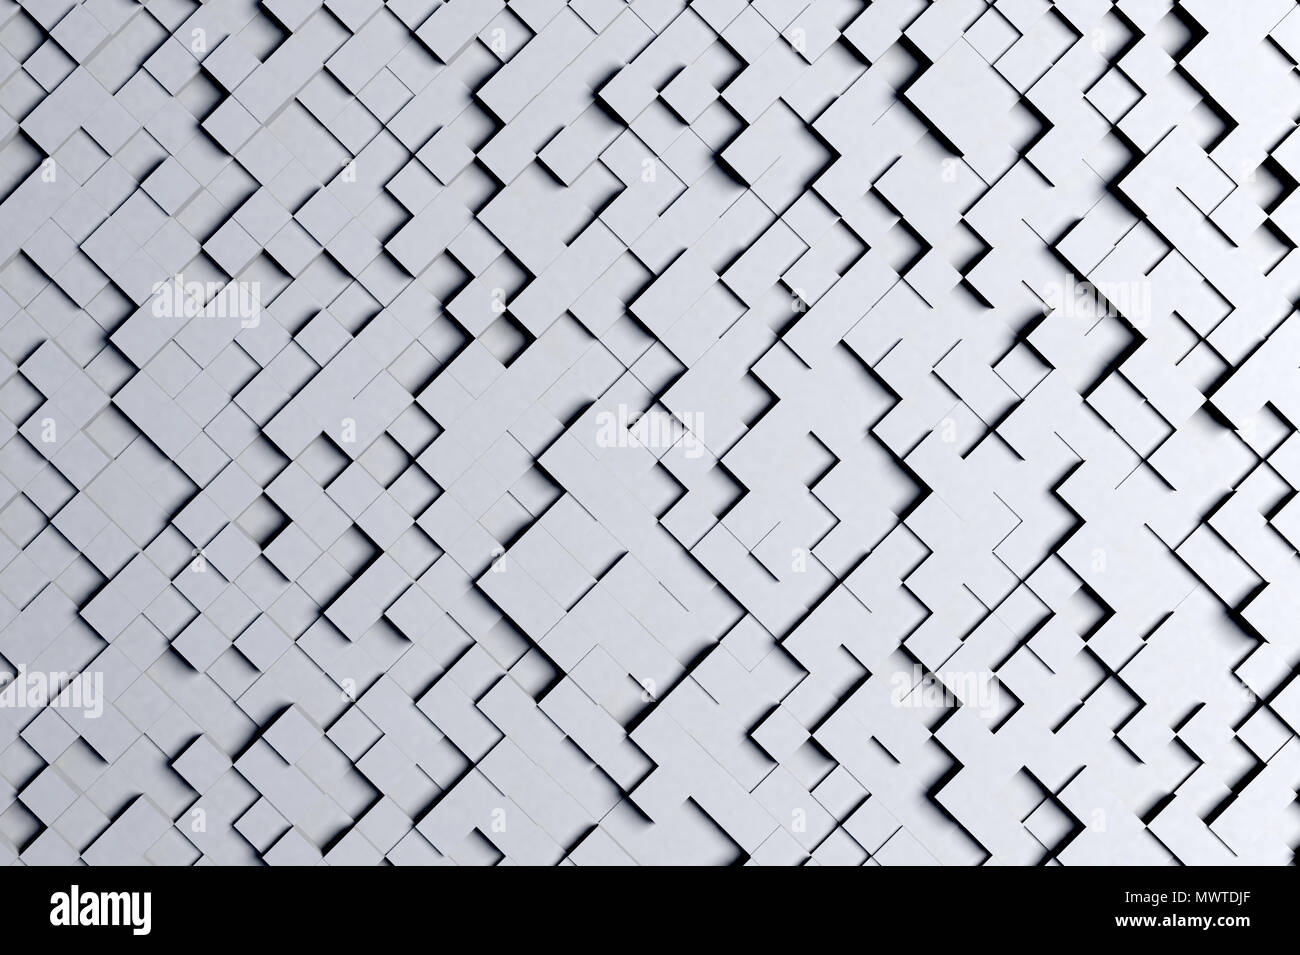 Abstract Diagonal Black and White or Gray 3d Geometric Small Cube Tiles Background Design Pattern Stock Photo